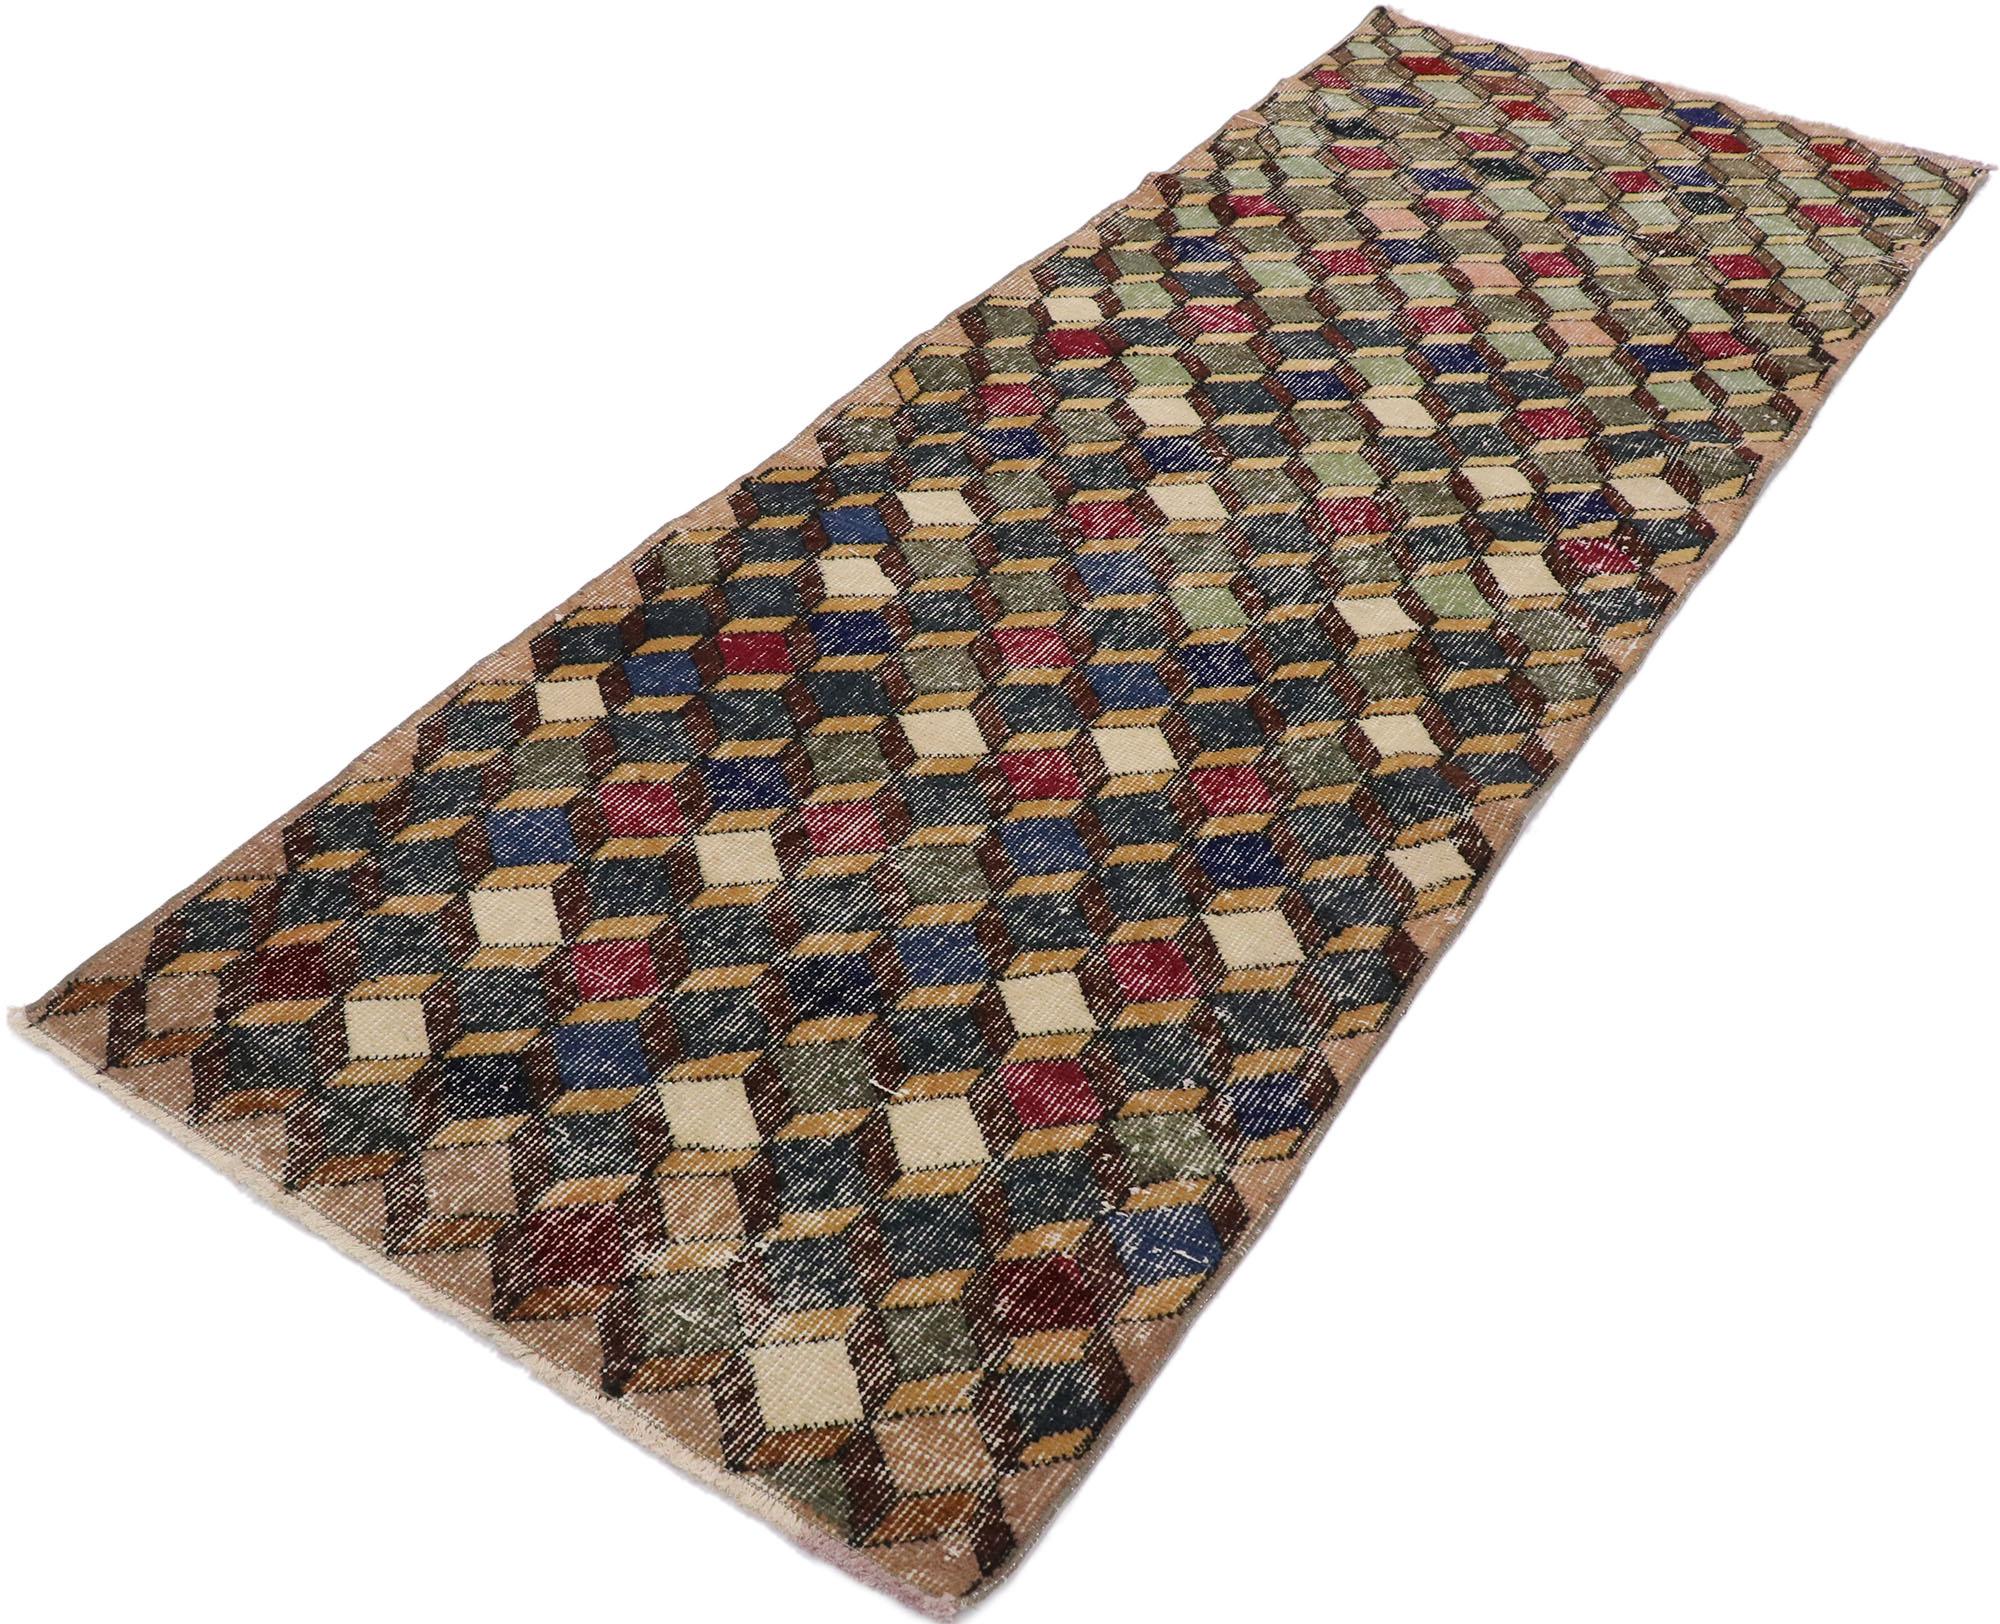 53360, distressed vintage Turkish Sivas rug with Rustic Mid-Century Modern style. This hand knotted wool distressed vintage Turkish Sivas rug features an all-over lattice pattern spread across an abrashed field. Tan and brown parallelograms form a